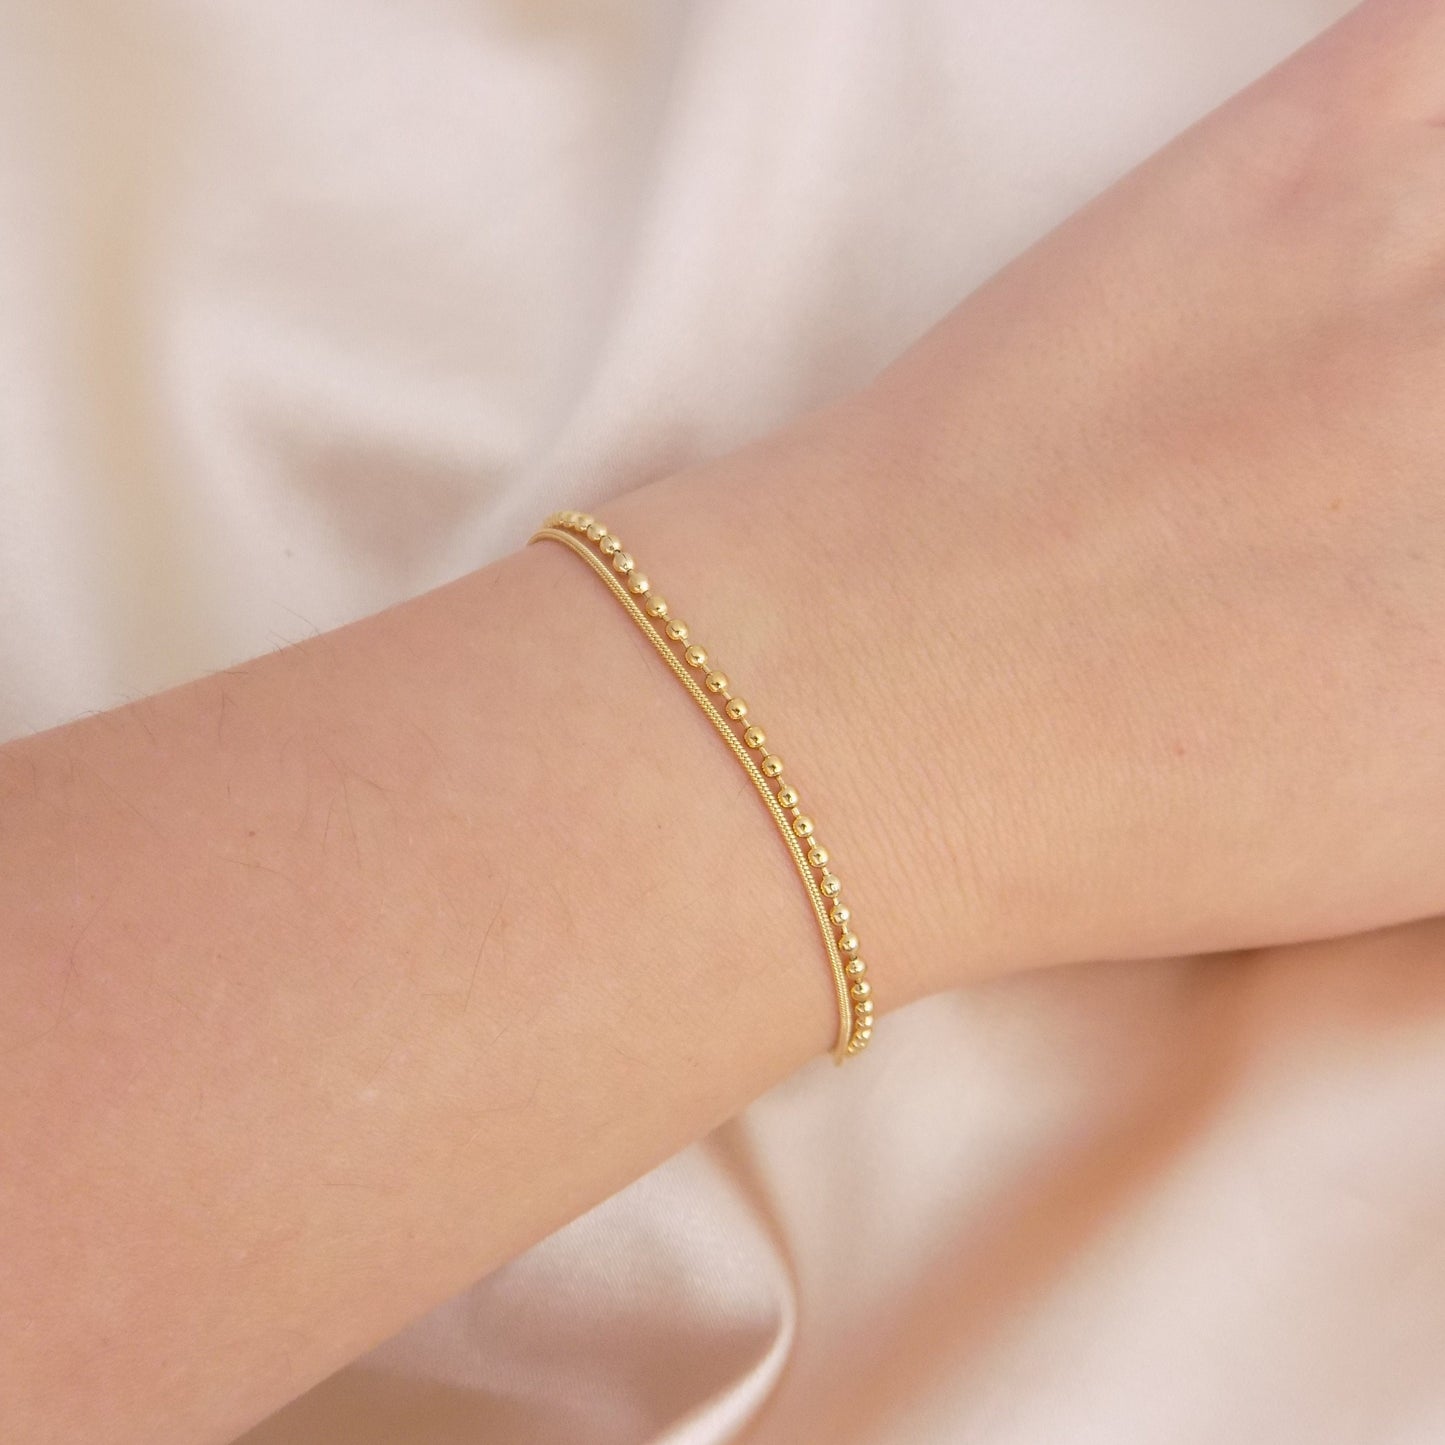 18K Gold Beaded Double Strand Bracelet Adjustable Stainless Steel, Delicate Gold Layer, Simple Everyday, M7-125